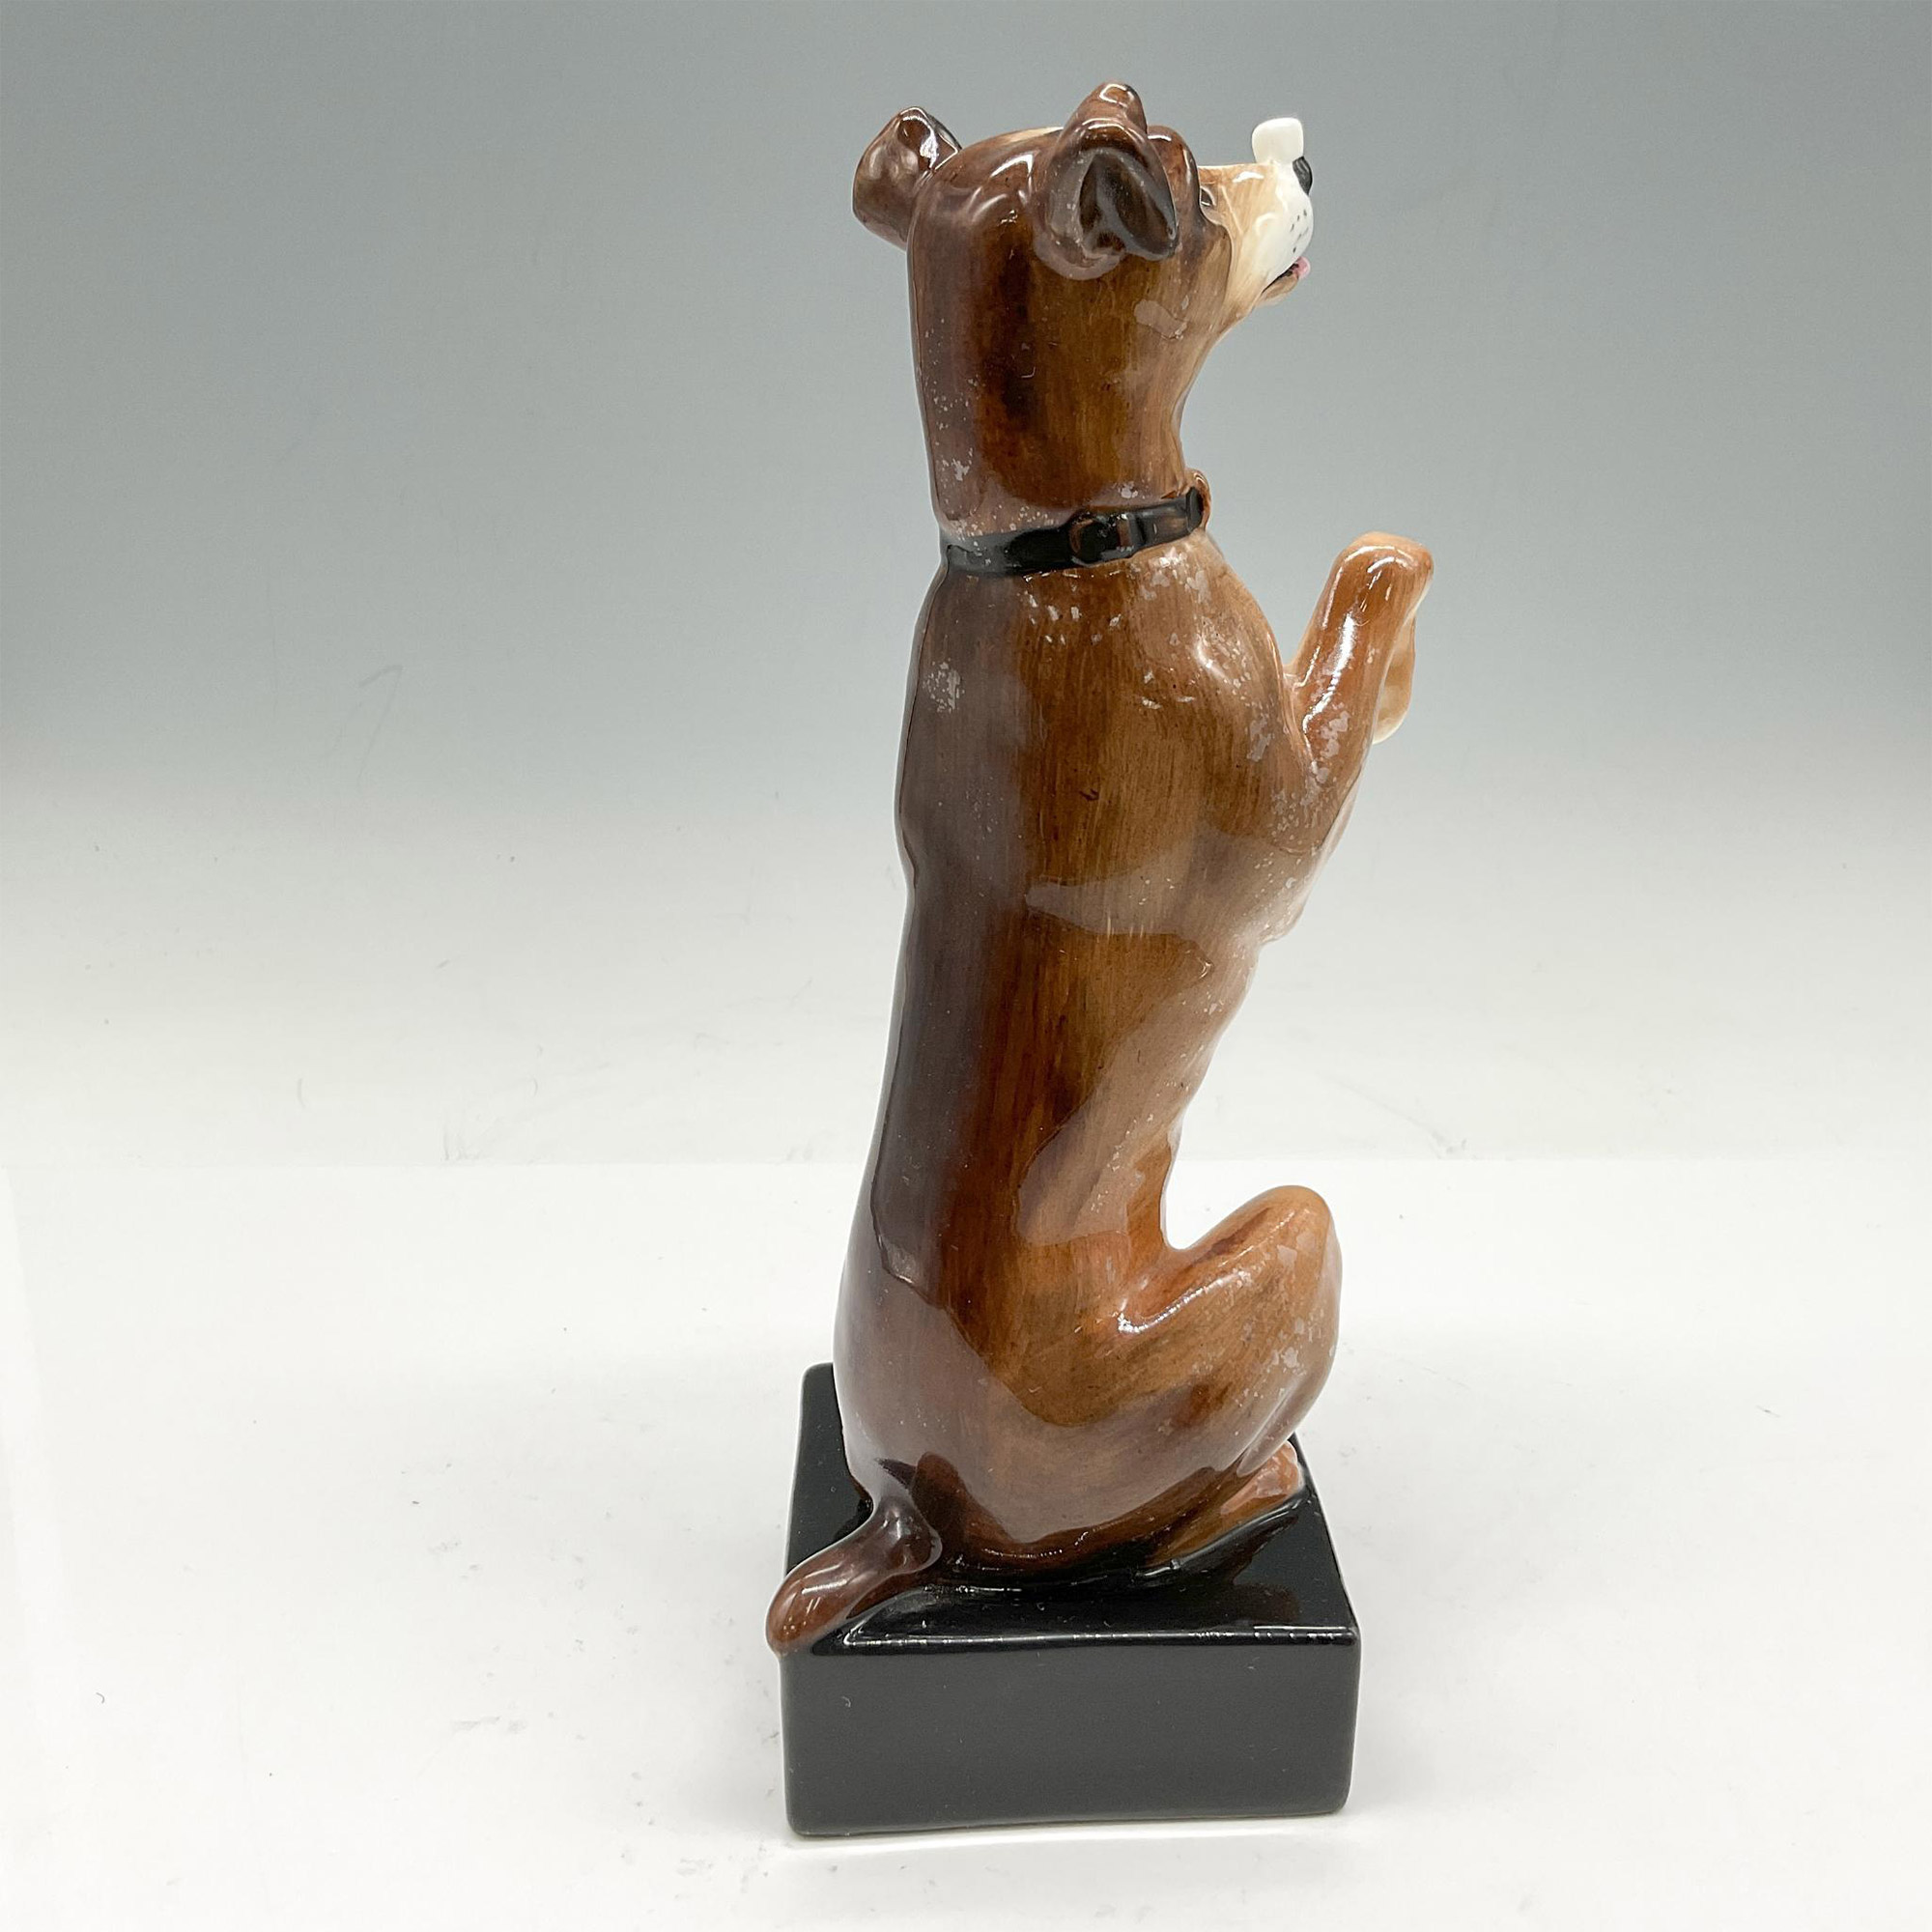 Dog with Cube on Nose - Royal Doulton Animal Figurine - Image 2 of 4